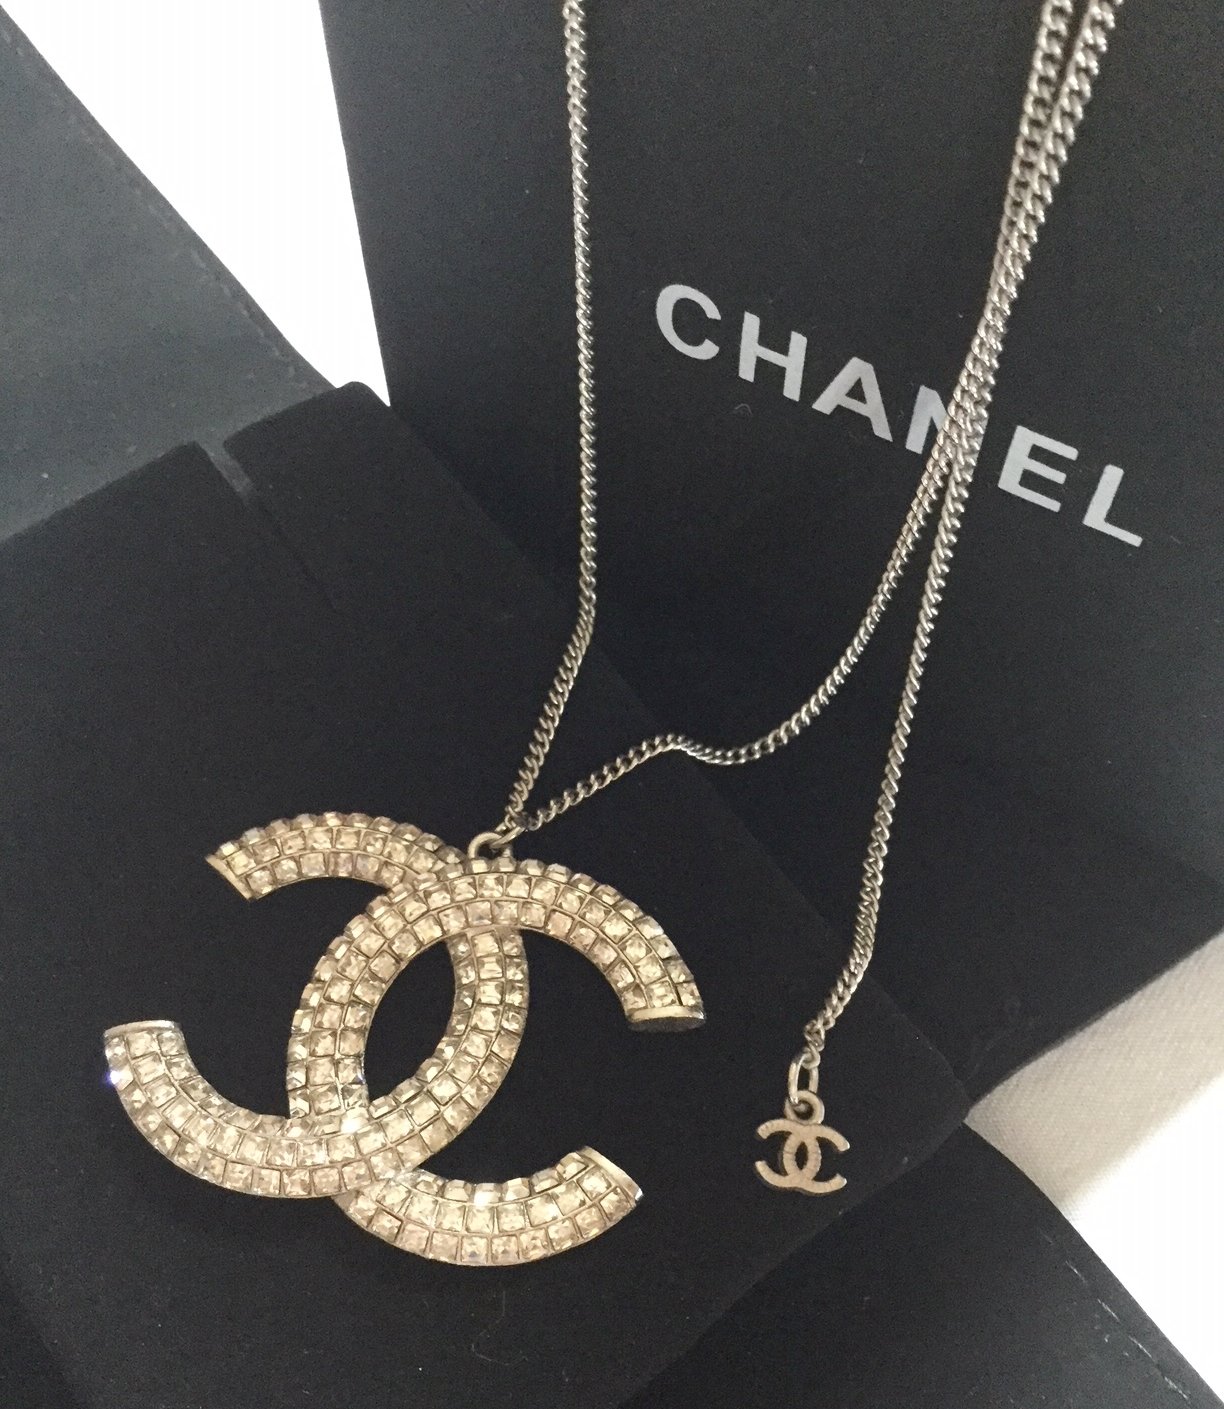 CHANEL, Jewelry, Beautiful Chanel Cc Necklace